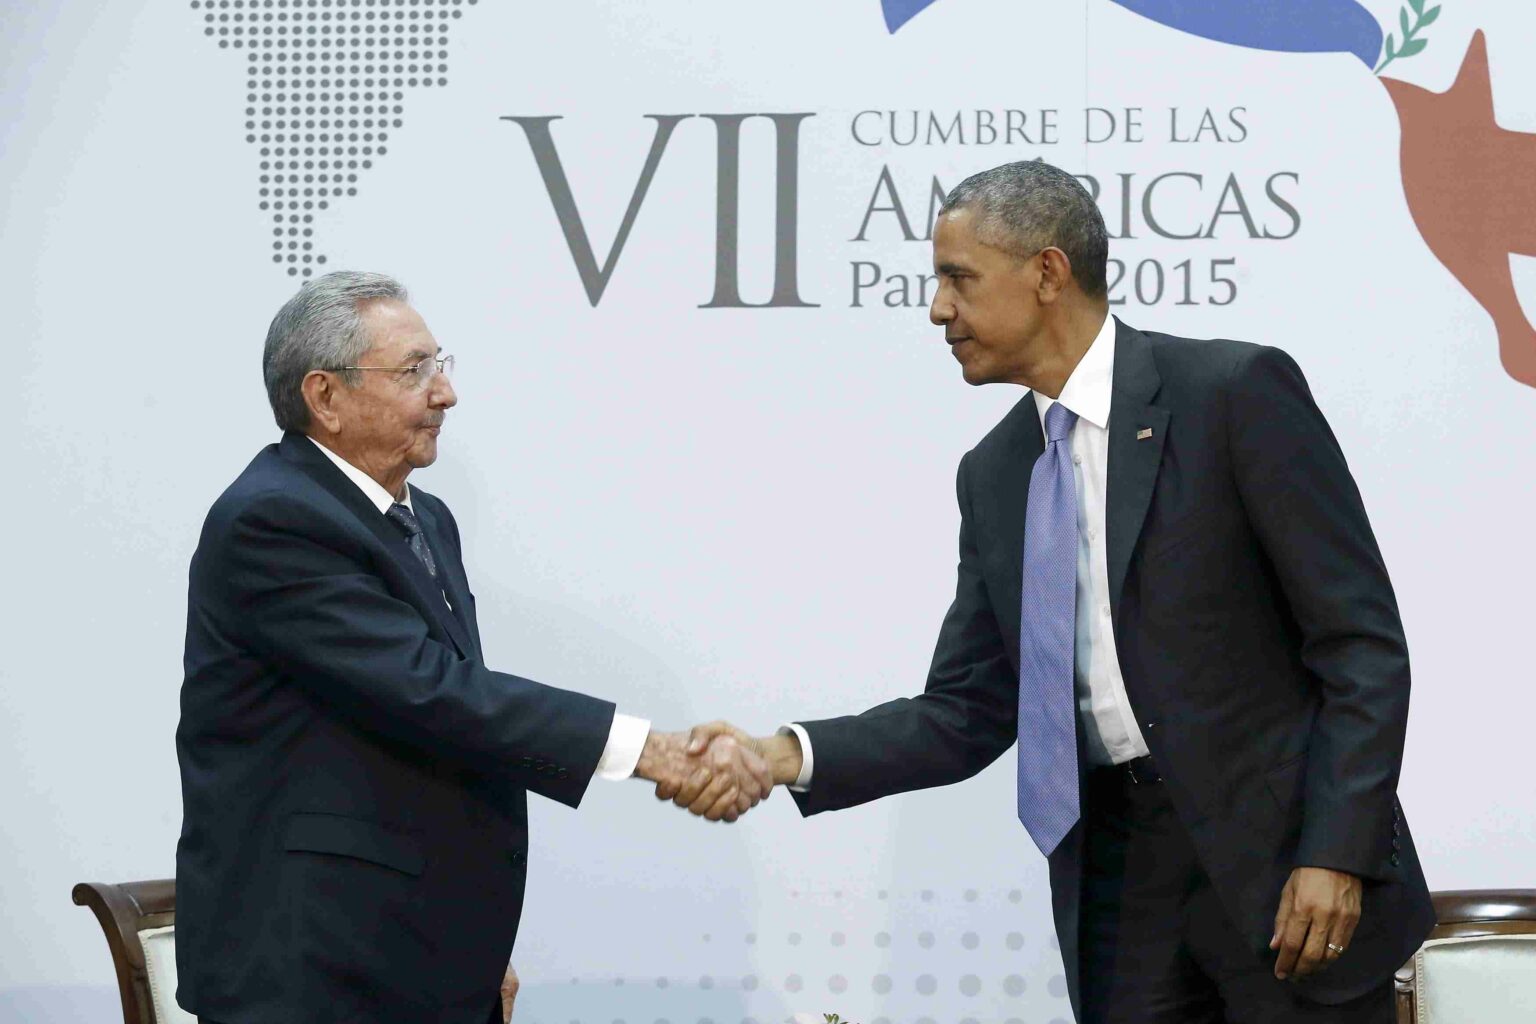 Obama shaking hands with Castro